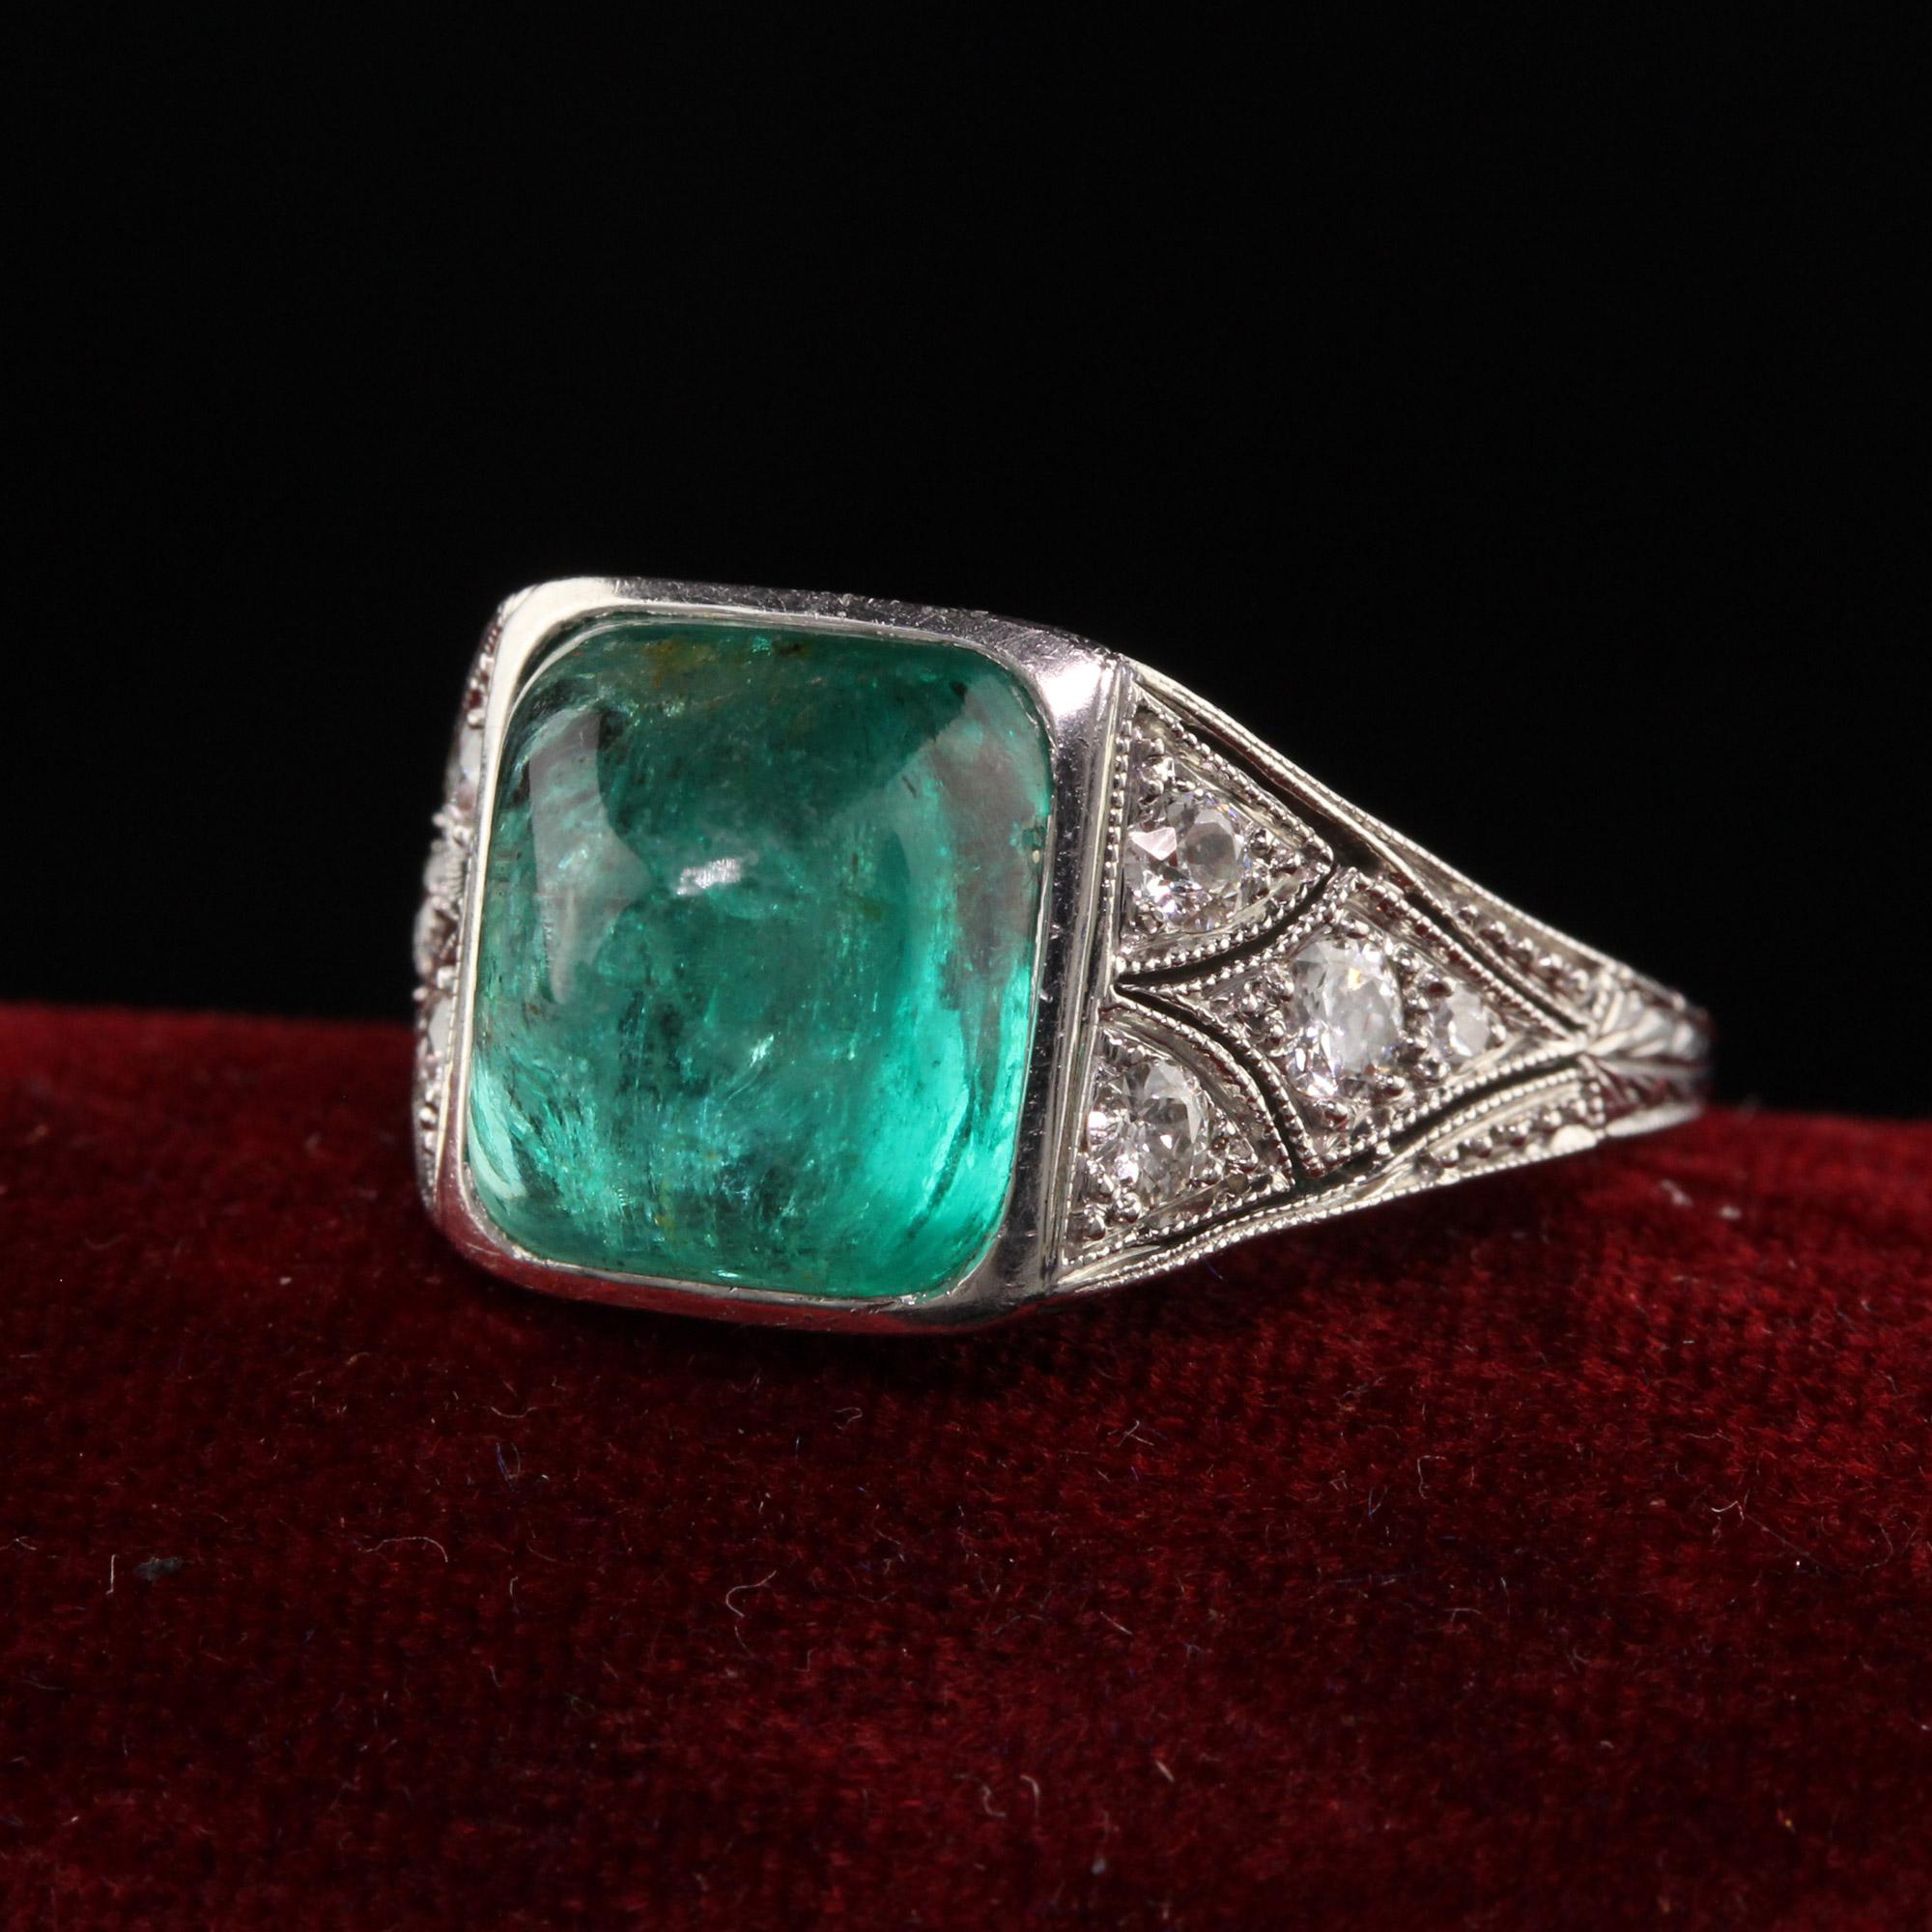 Beautiful Antique Art Deco Platinum Sugar Loaf Emerald Old Euro Diamond Filigree Ring. This incredible Art Deco ring is crafted in platinum and has amazing filigree work on it. The center is a beautiful sugar loaf emerald that is bezel set in an